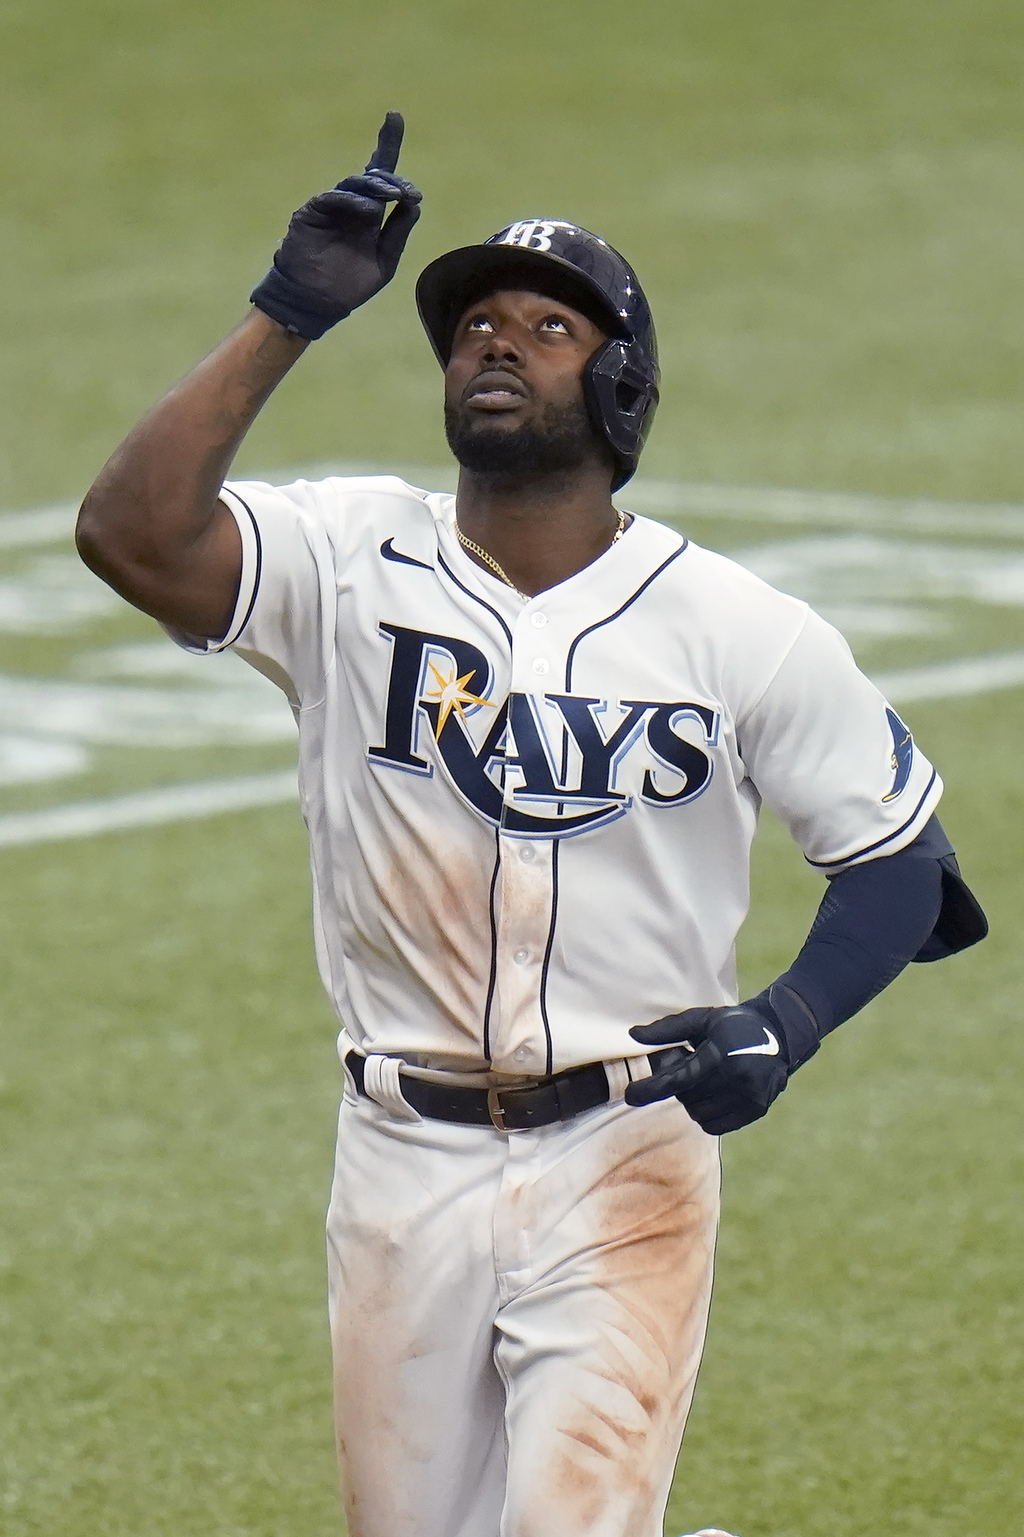 Los Rays blanquean a Yanquis